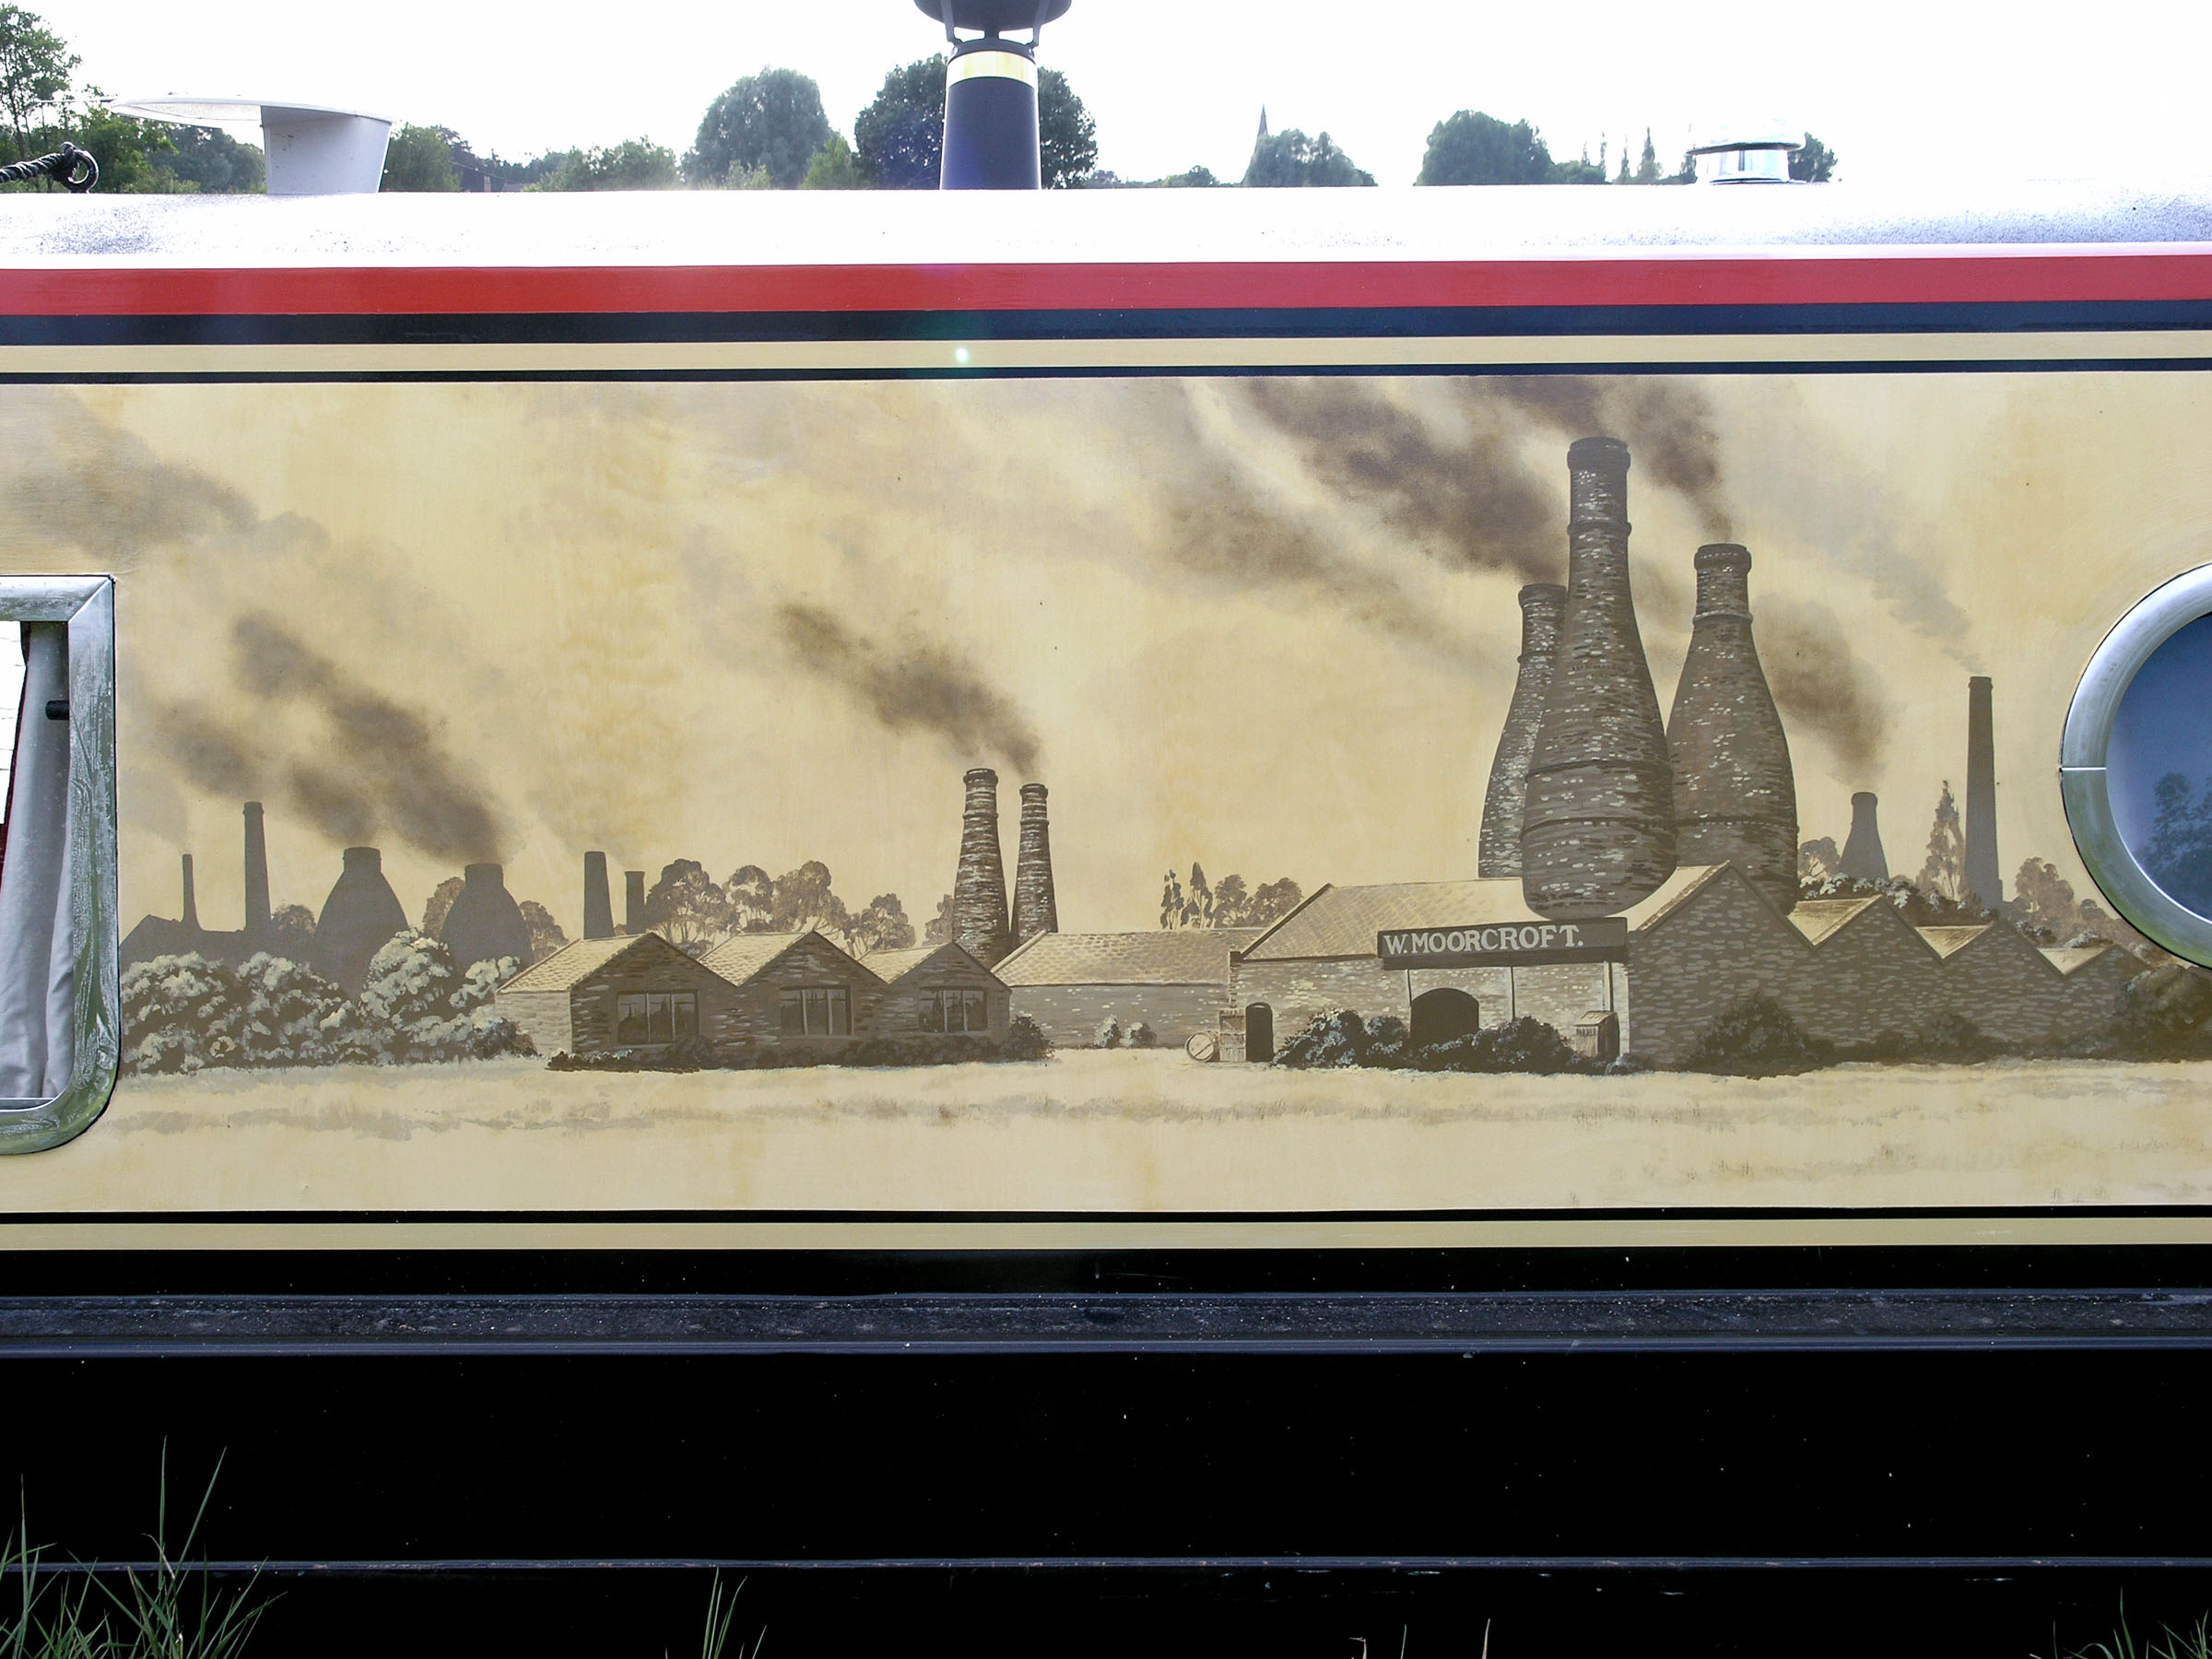 This part of the mural depicts the Moorcroft Pottery, which still stands as a museum, but only one bottle kiln remains today